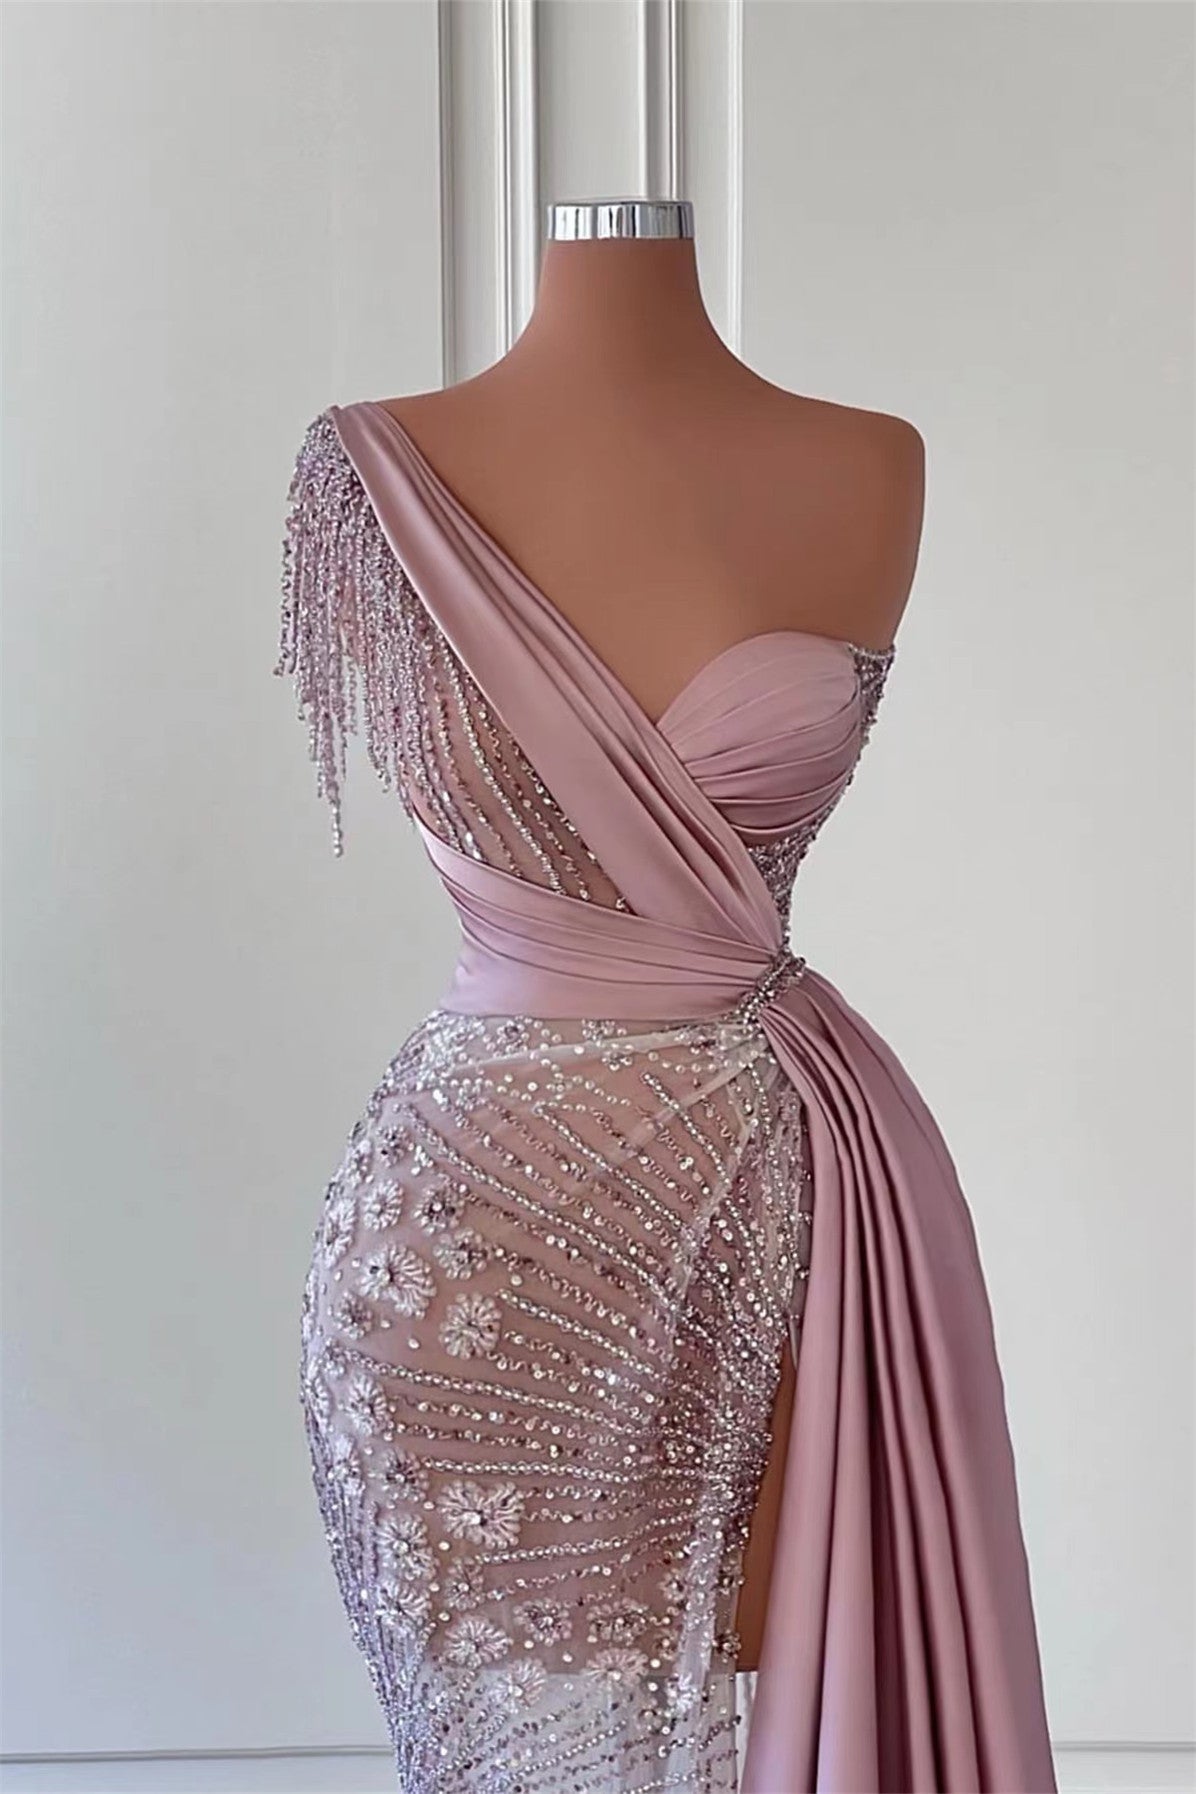 Stunning Mermaid Prom Dress with One Shoulder and Bead Embellishments